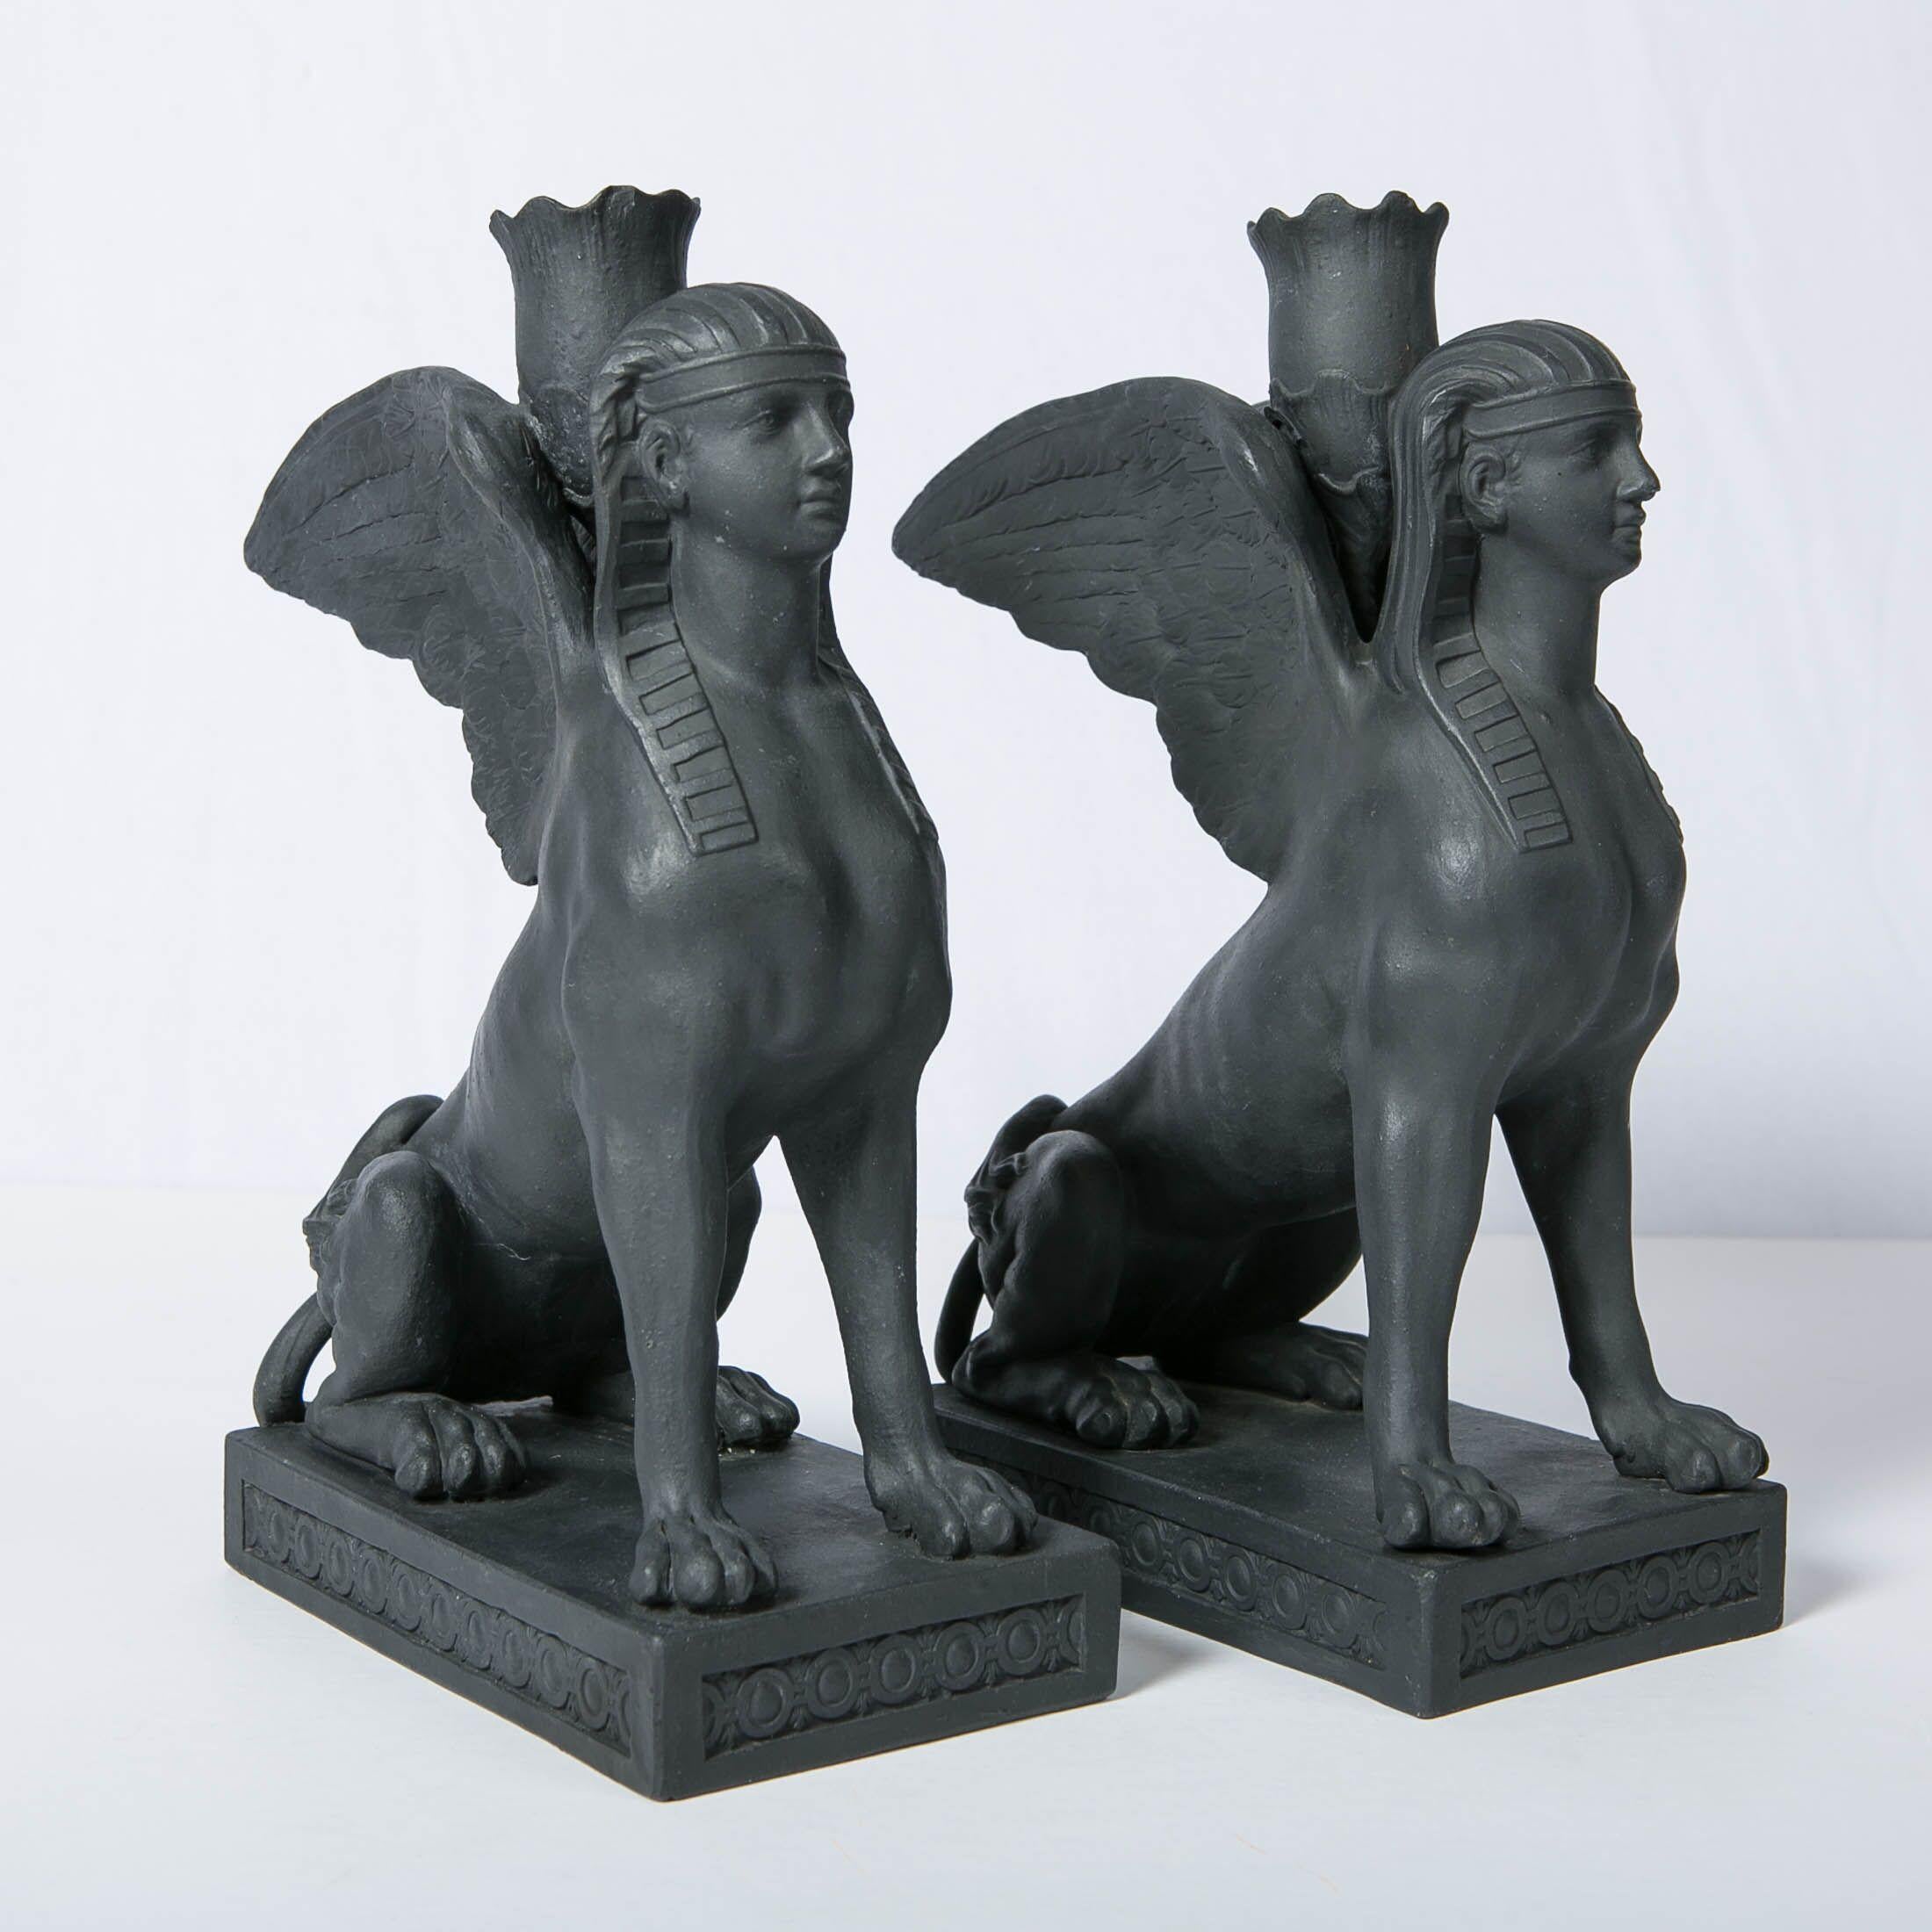 Molded Pair Wedgwood Egyptian Revival Black Basalt Sphinxes Made 18th Century, England For Sale